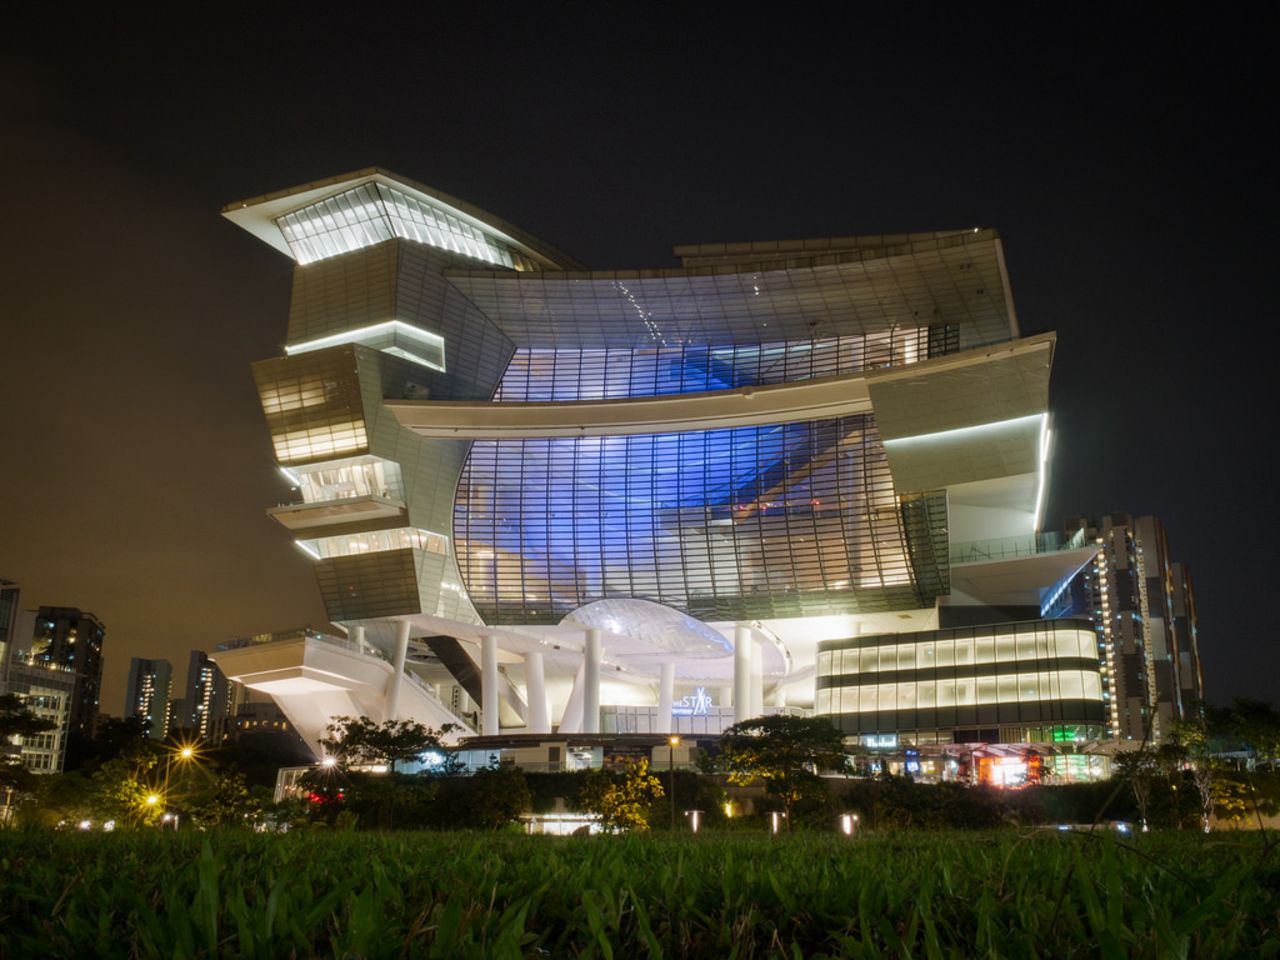 Sean Lowcay describes <a href="http://ireport.cnn.com/docs/DOC-1128656">the Star</a> Performing Arts Centre in Singapore, as an architectural explosion of shapes and ideas. The 15-story structure also functions as a civic and cultural center. At the top of the building, there are 5,000 seats designated for theater performances and church events.